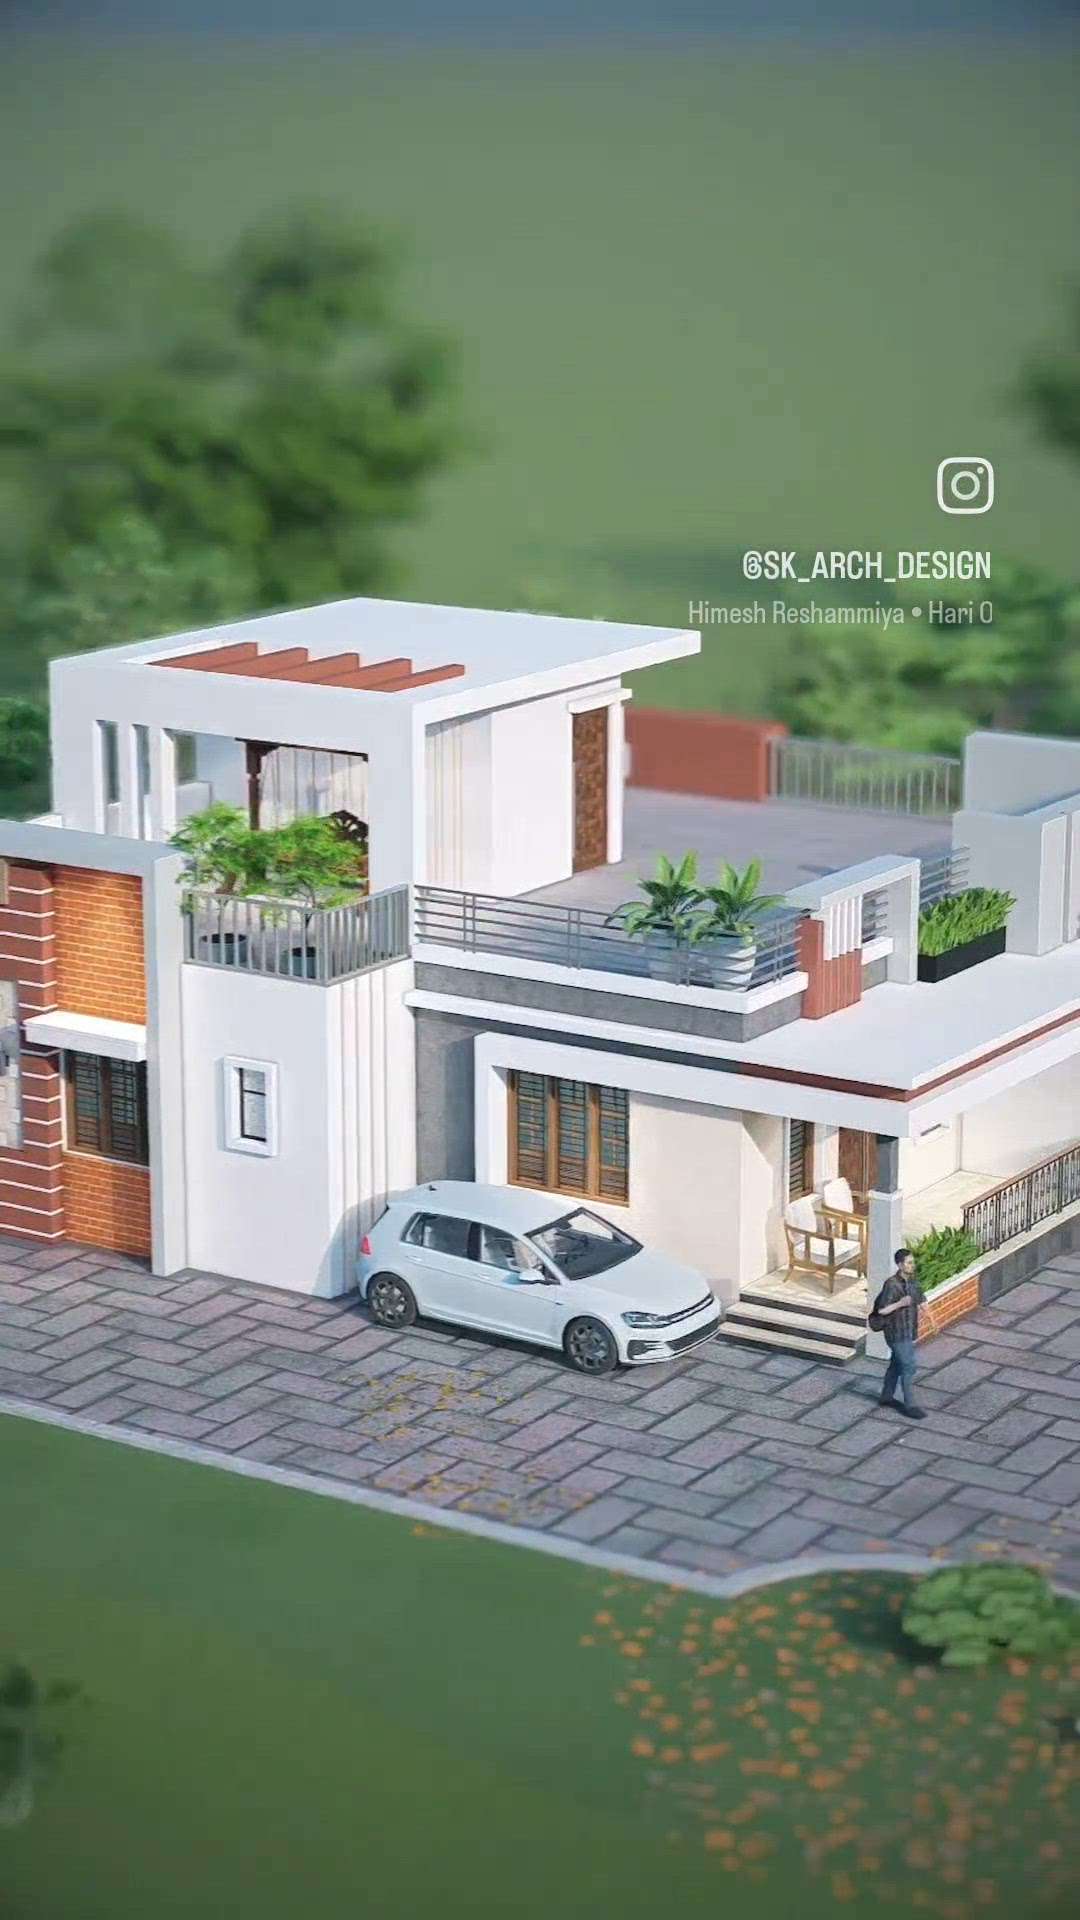 House Design| exterior design 🏡
.
.
.
#houseplaning #housedesign #interiors #vastushastra #contractor #jaipurdiaries #architect #architecturedesign #planing #2dplan
#structure #houseworking #electrical #drawing #designer #exteriordesign #architecture #drawing #shuttering #plane #doordesign #window#design
.
.
contact for :- 
.
WhatsApp link:- https://wa.me/message/ZNMVUL3RAHHDB1
email - skarchitects96@gmail.com
Website - http://Skarchdesign96.com